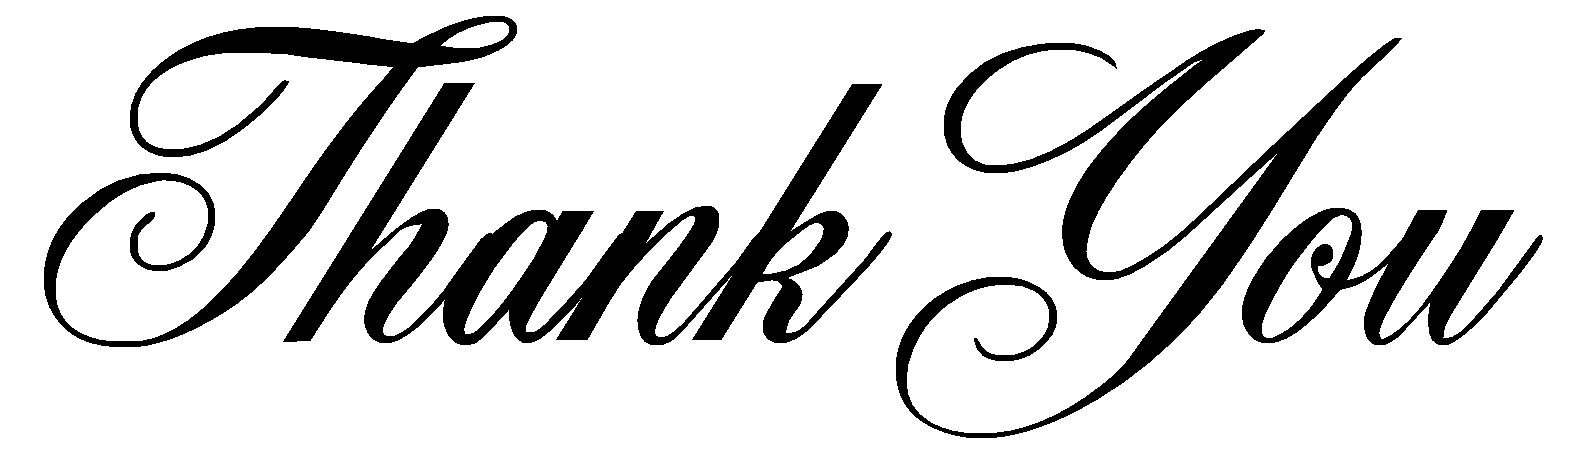 thanks clipart calligraphy